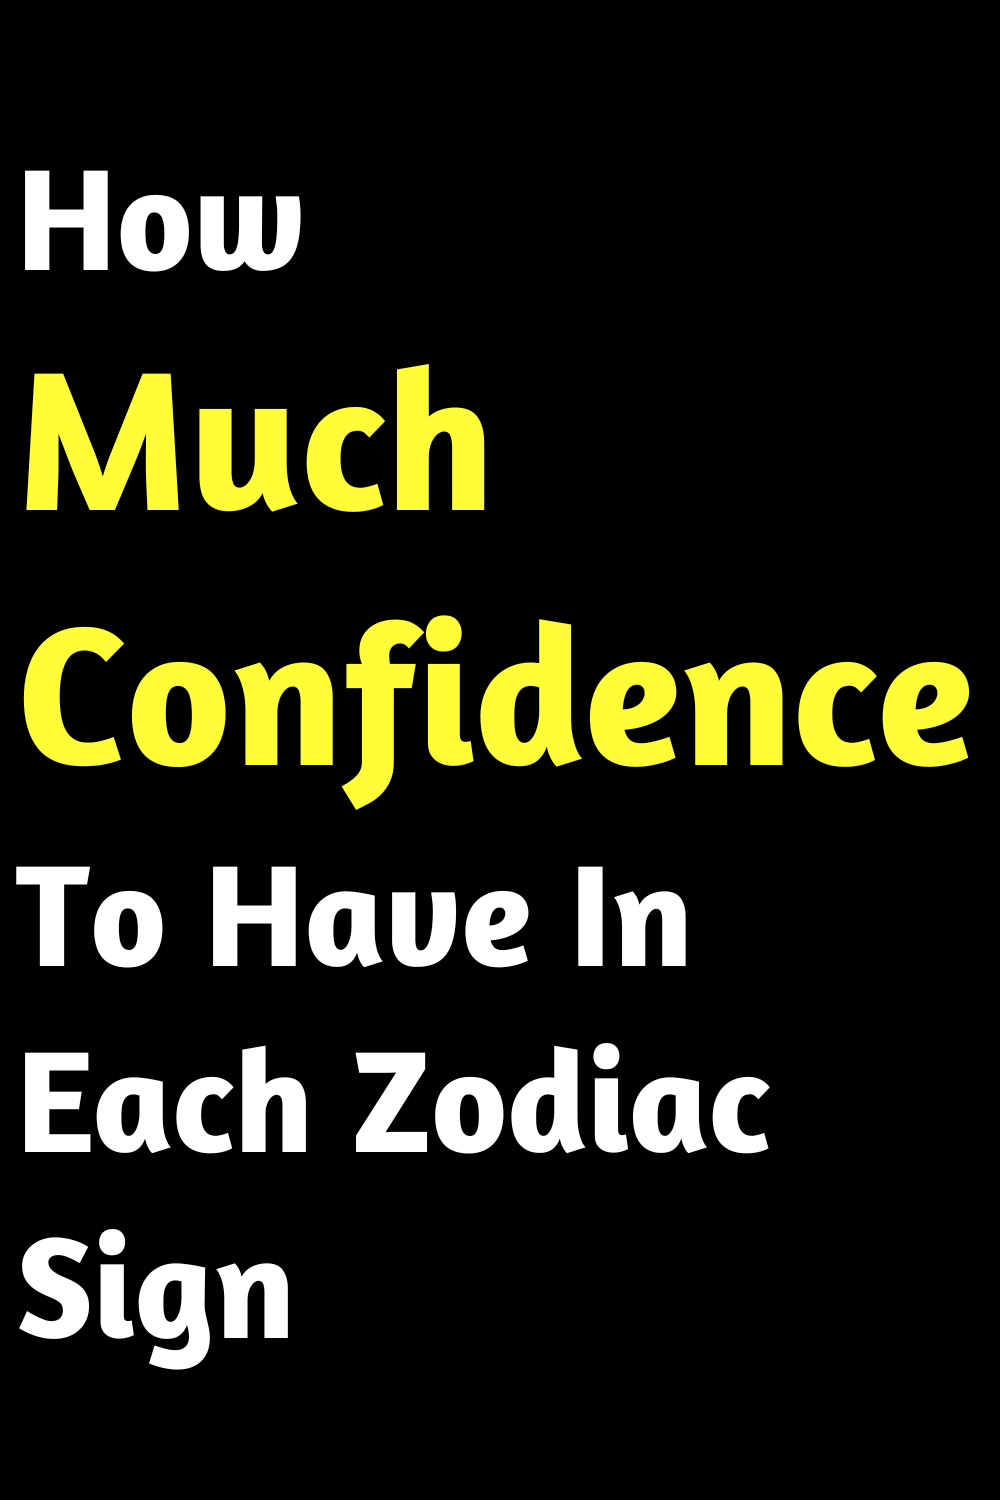 How Much Confidence To Have In Each Zodiac Sign